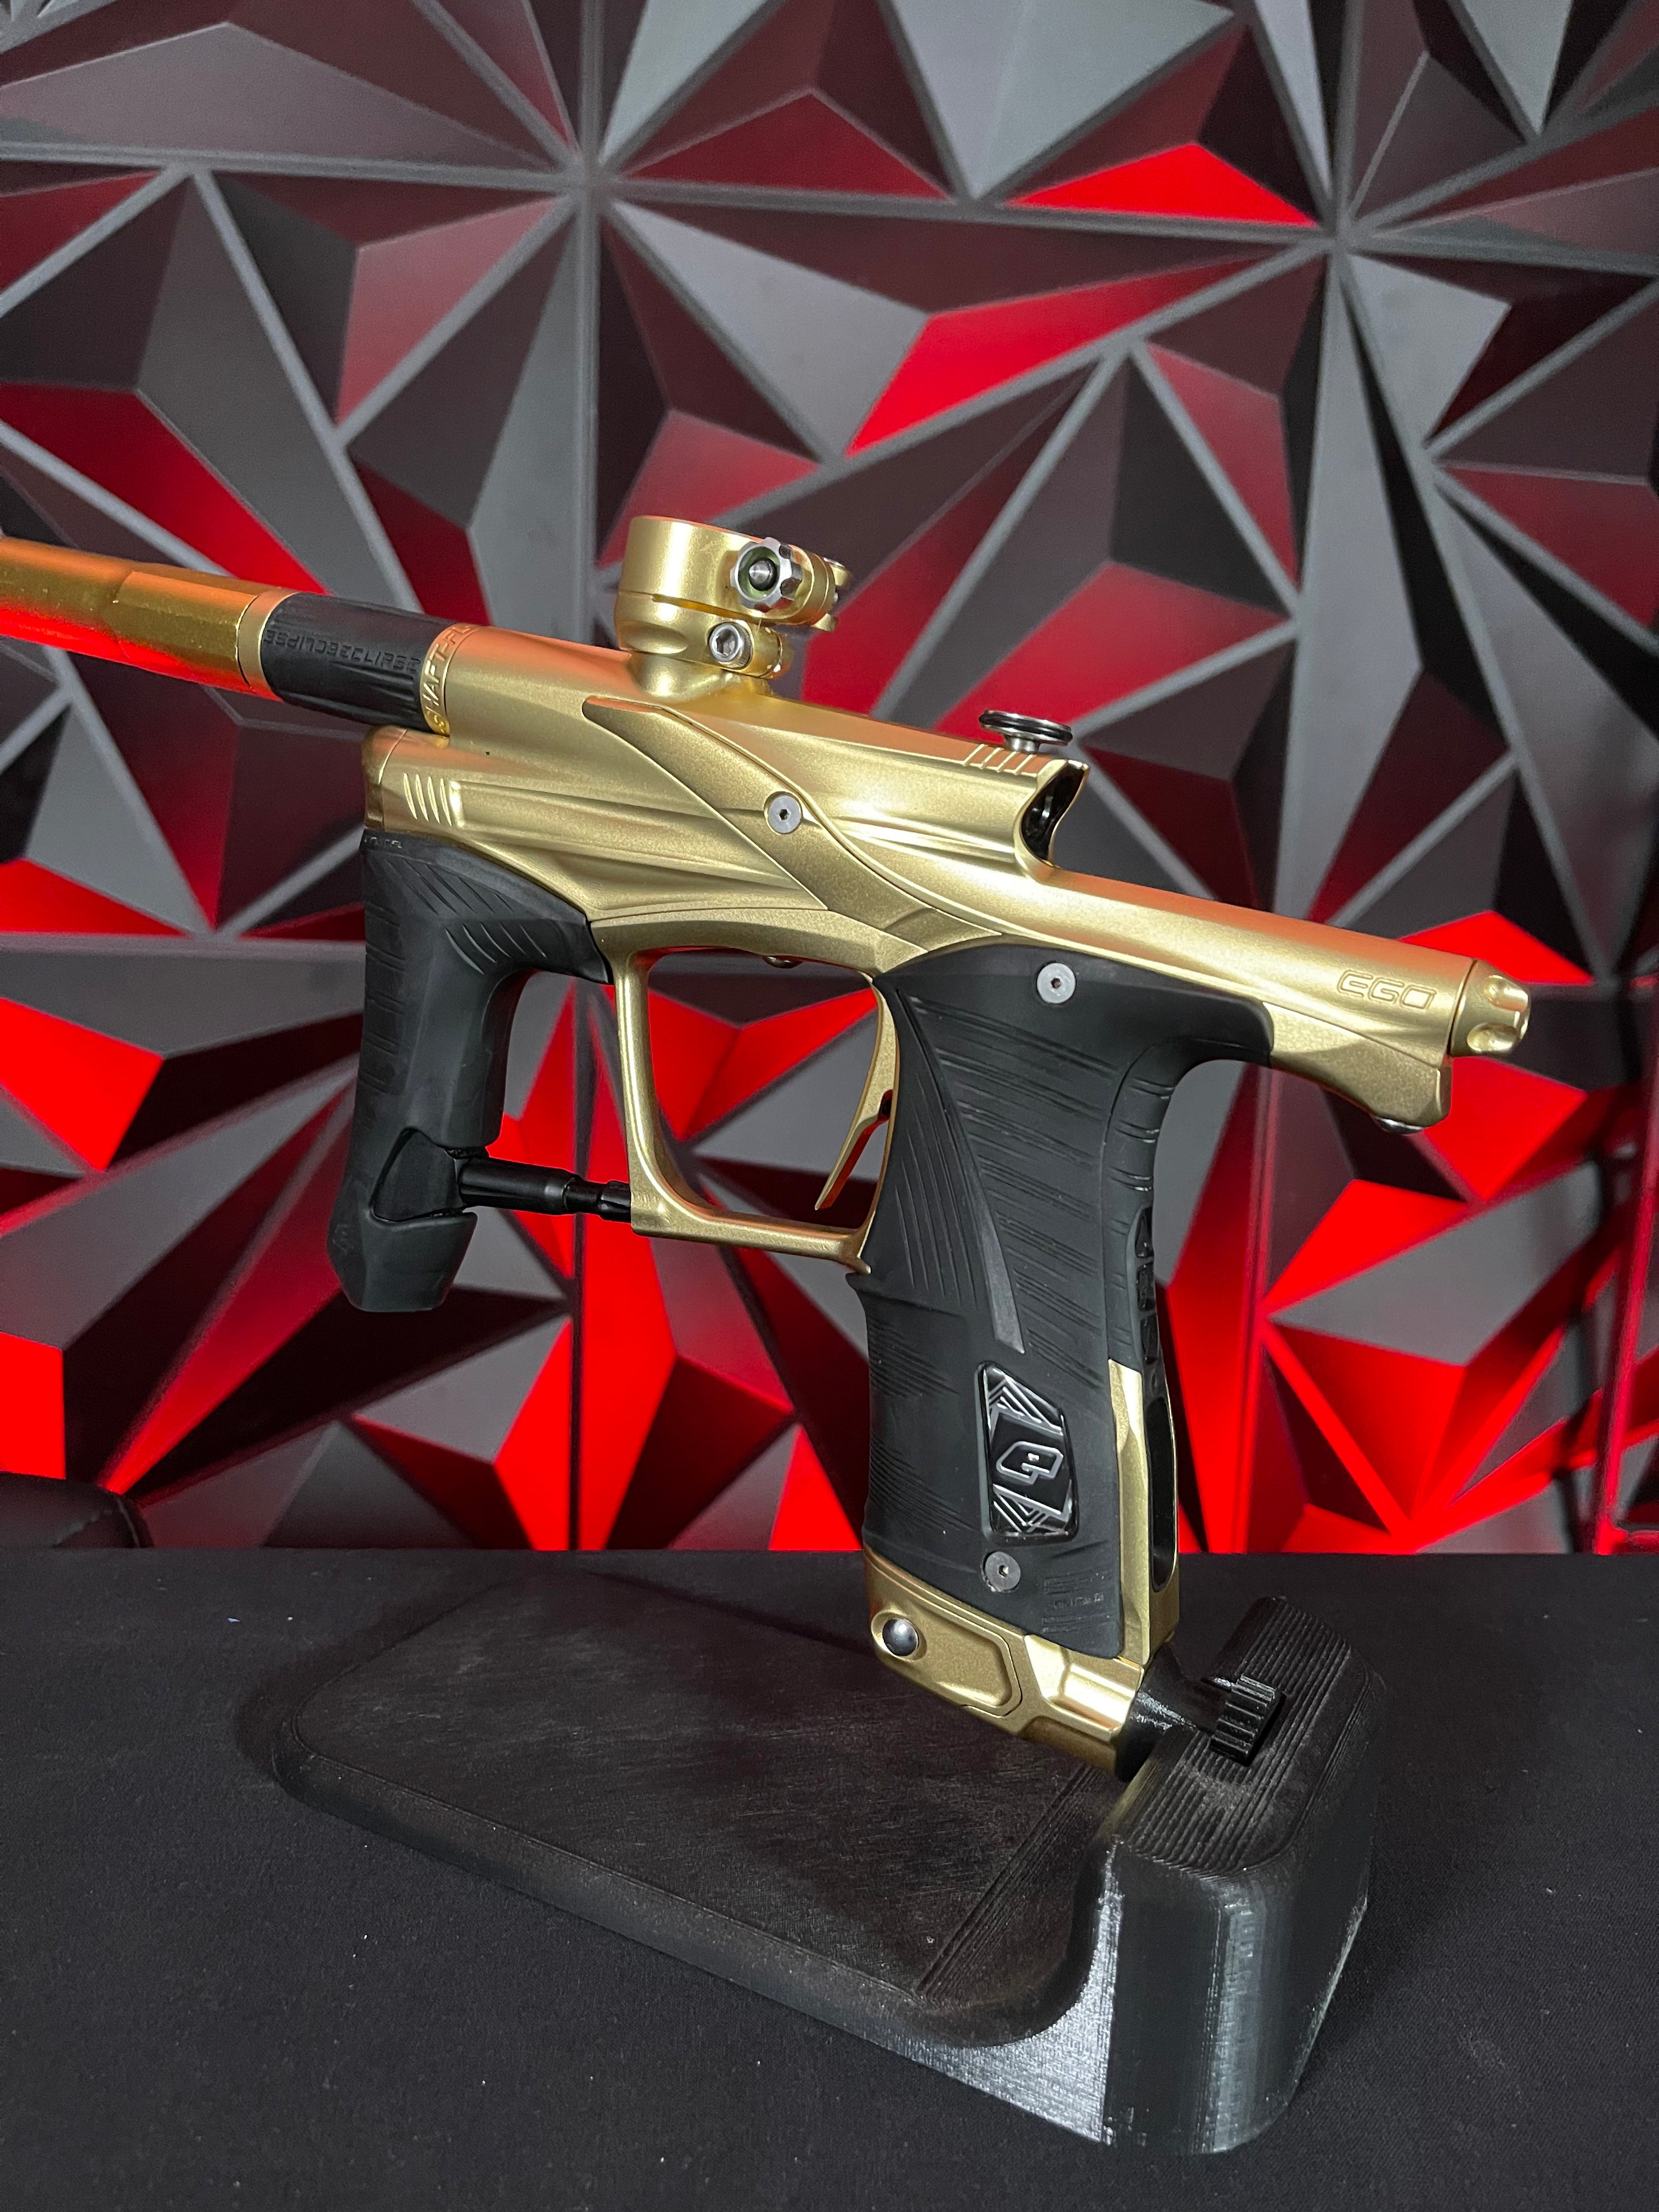 Used Planet Eclipse Lv1.6 Paintball Gun - Gold / Gold w/ Infamous